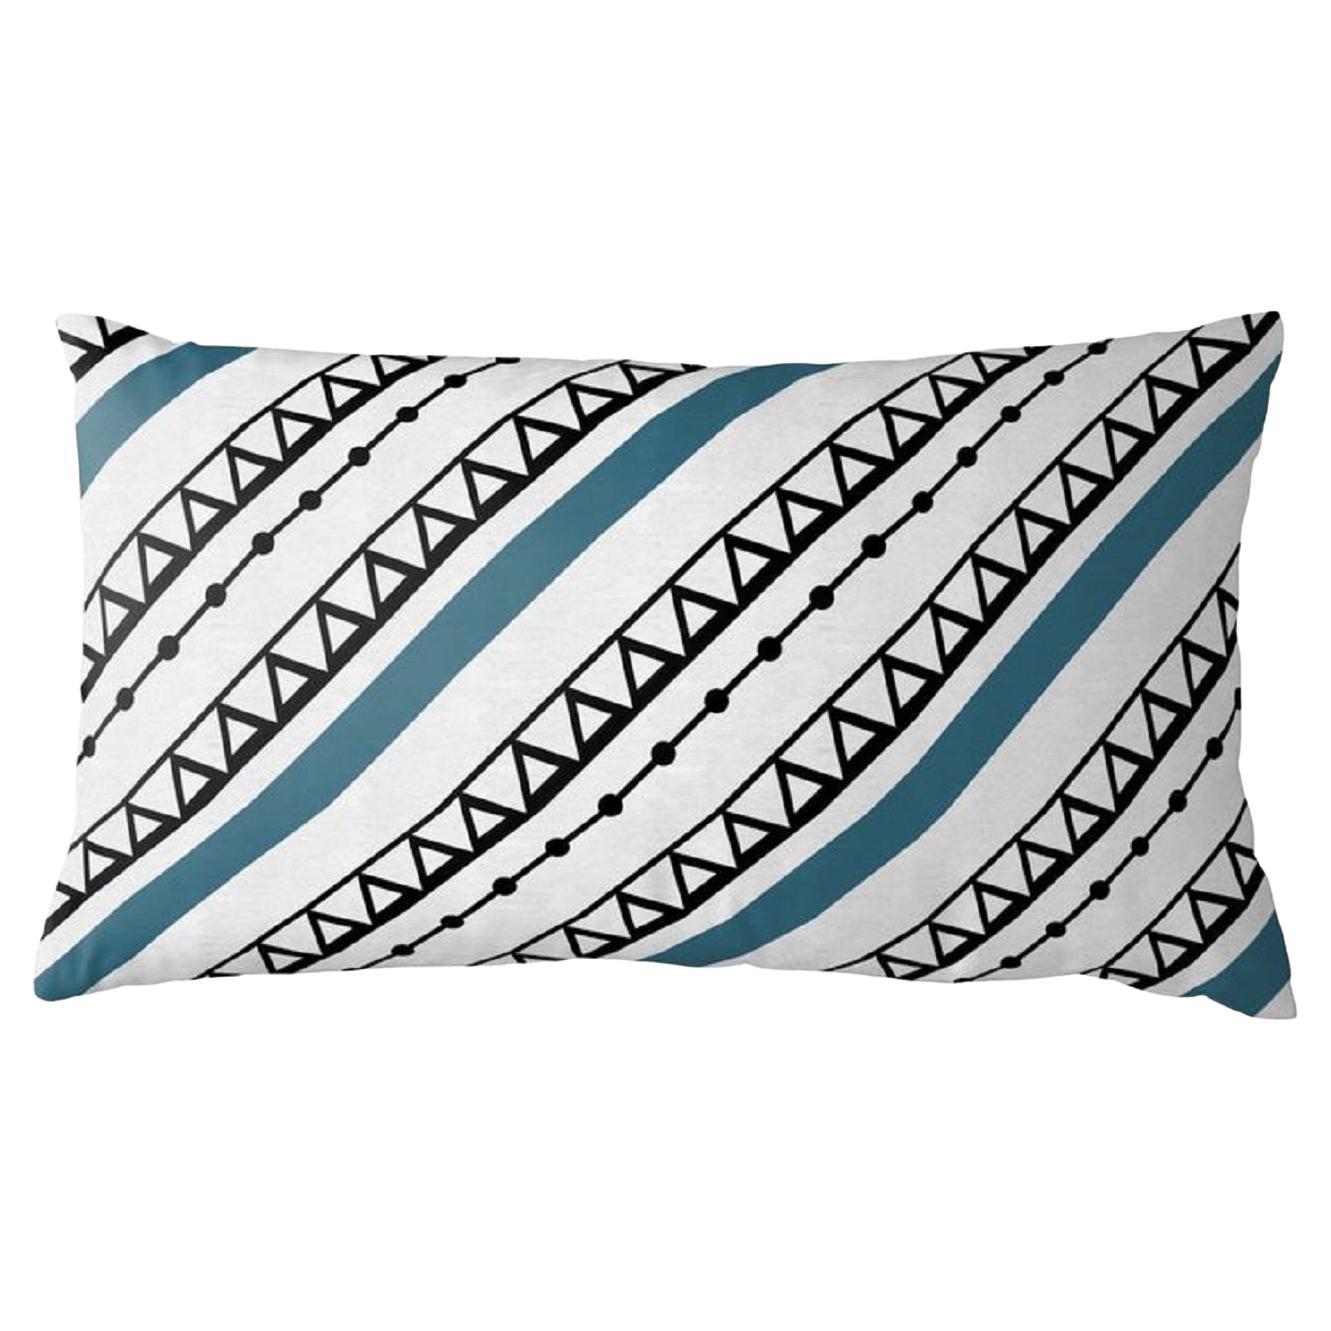 Ndop Blue and White Lumbar Pillow For Sale